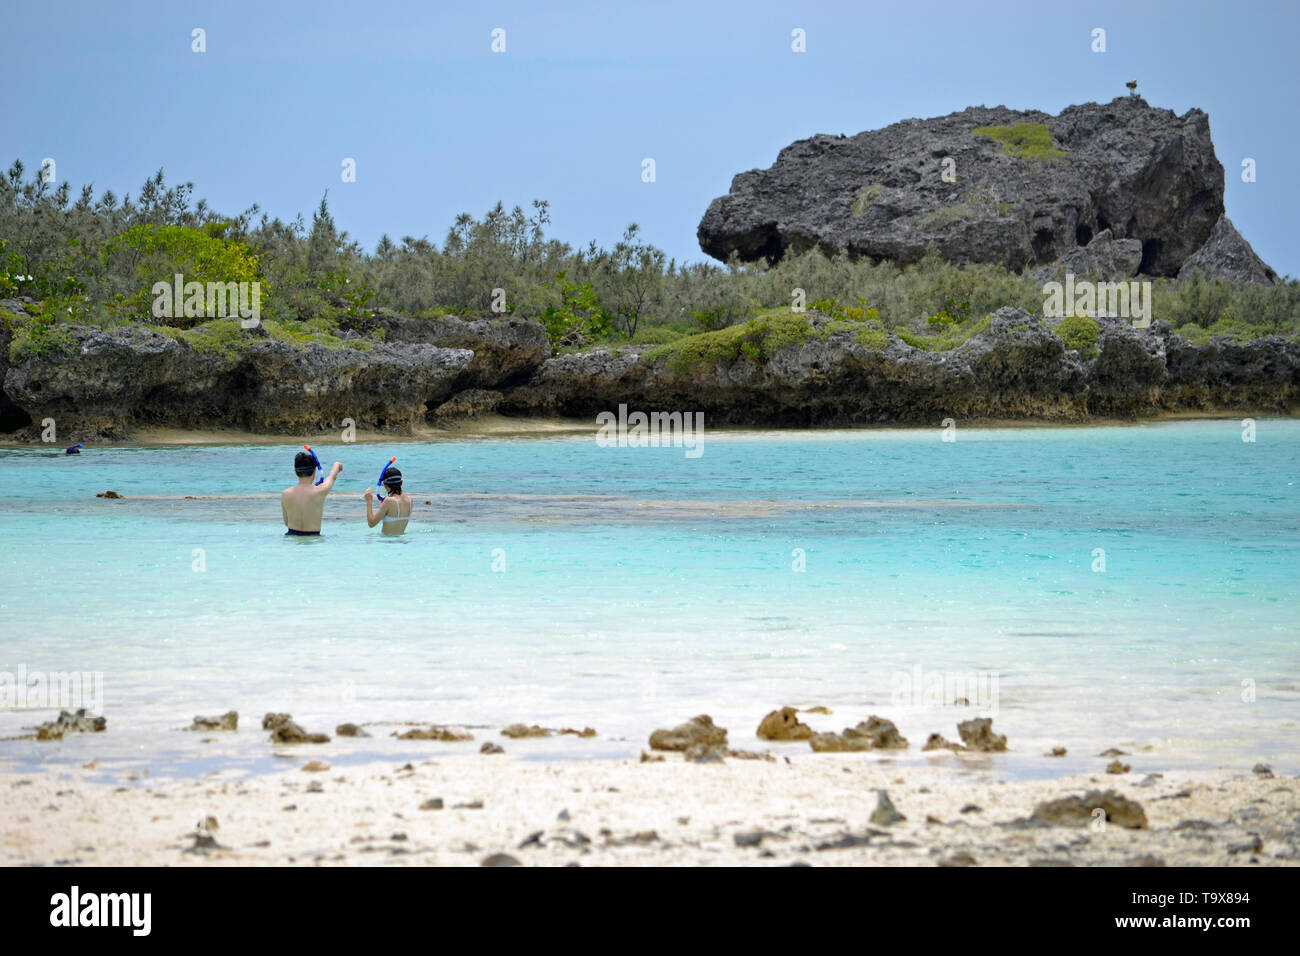 Snorkelers enjoy the Natural Pool of Oro Bay, Isle of Pines, New Caledonia, South Pacific Stock Photo